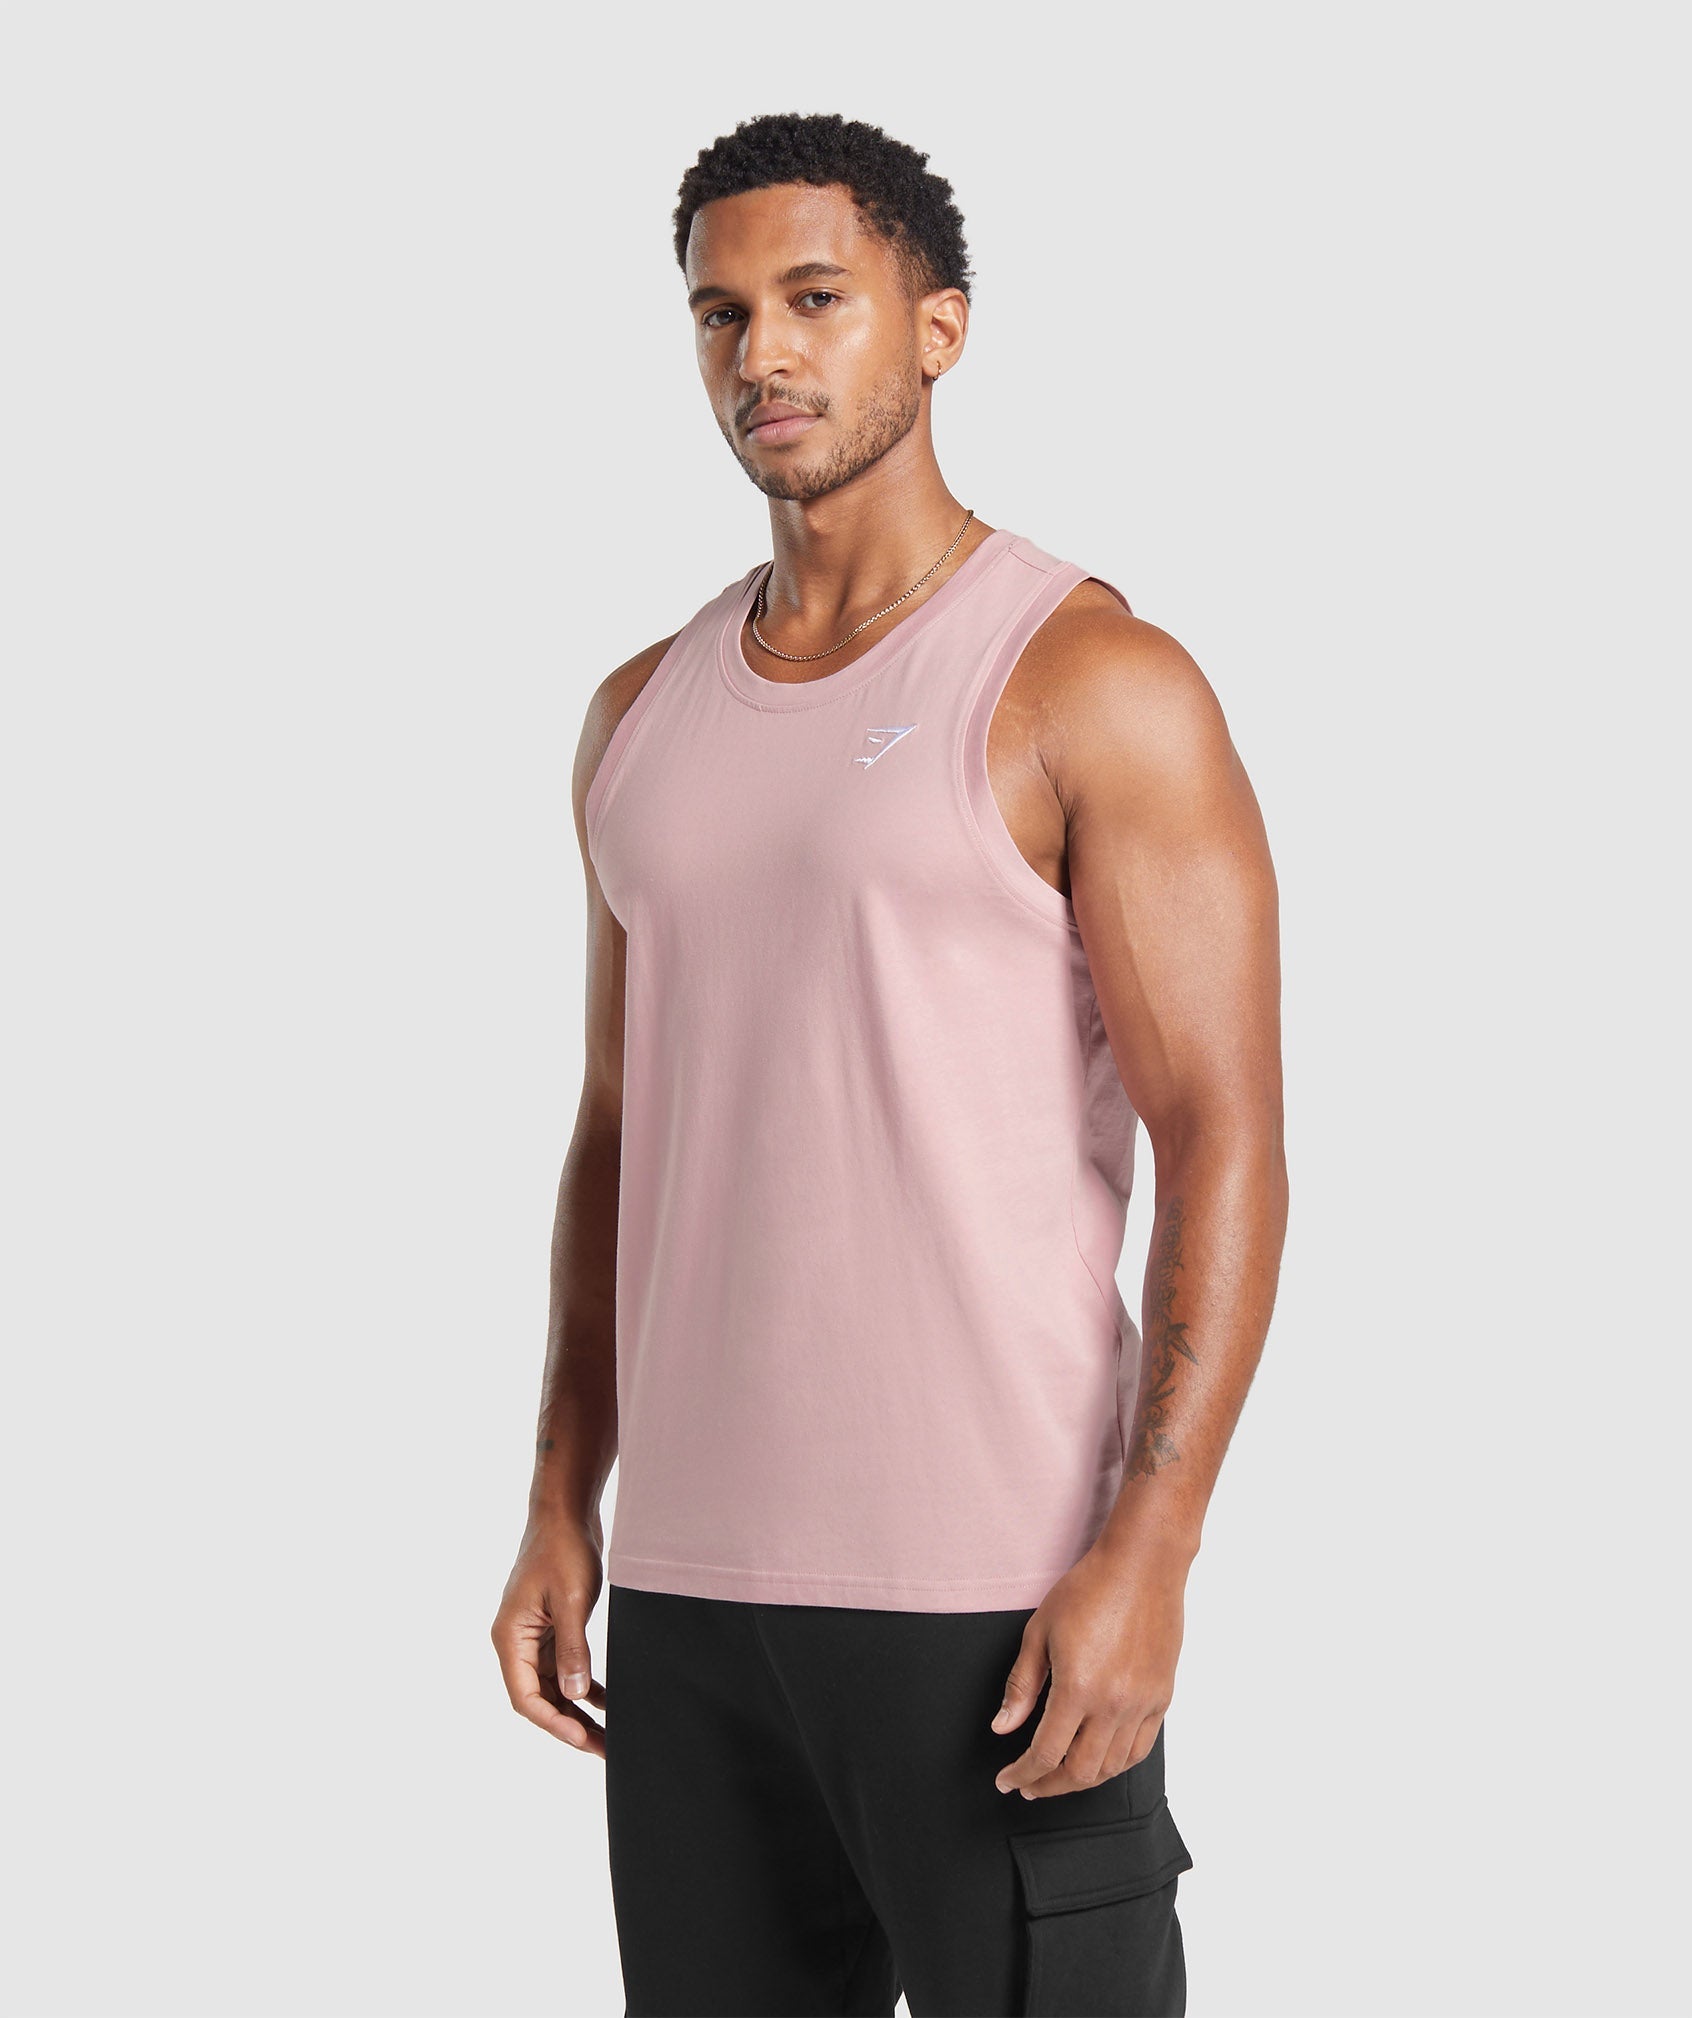 Crest Tank in Light Pink - view 3